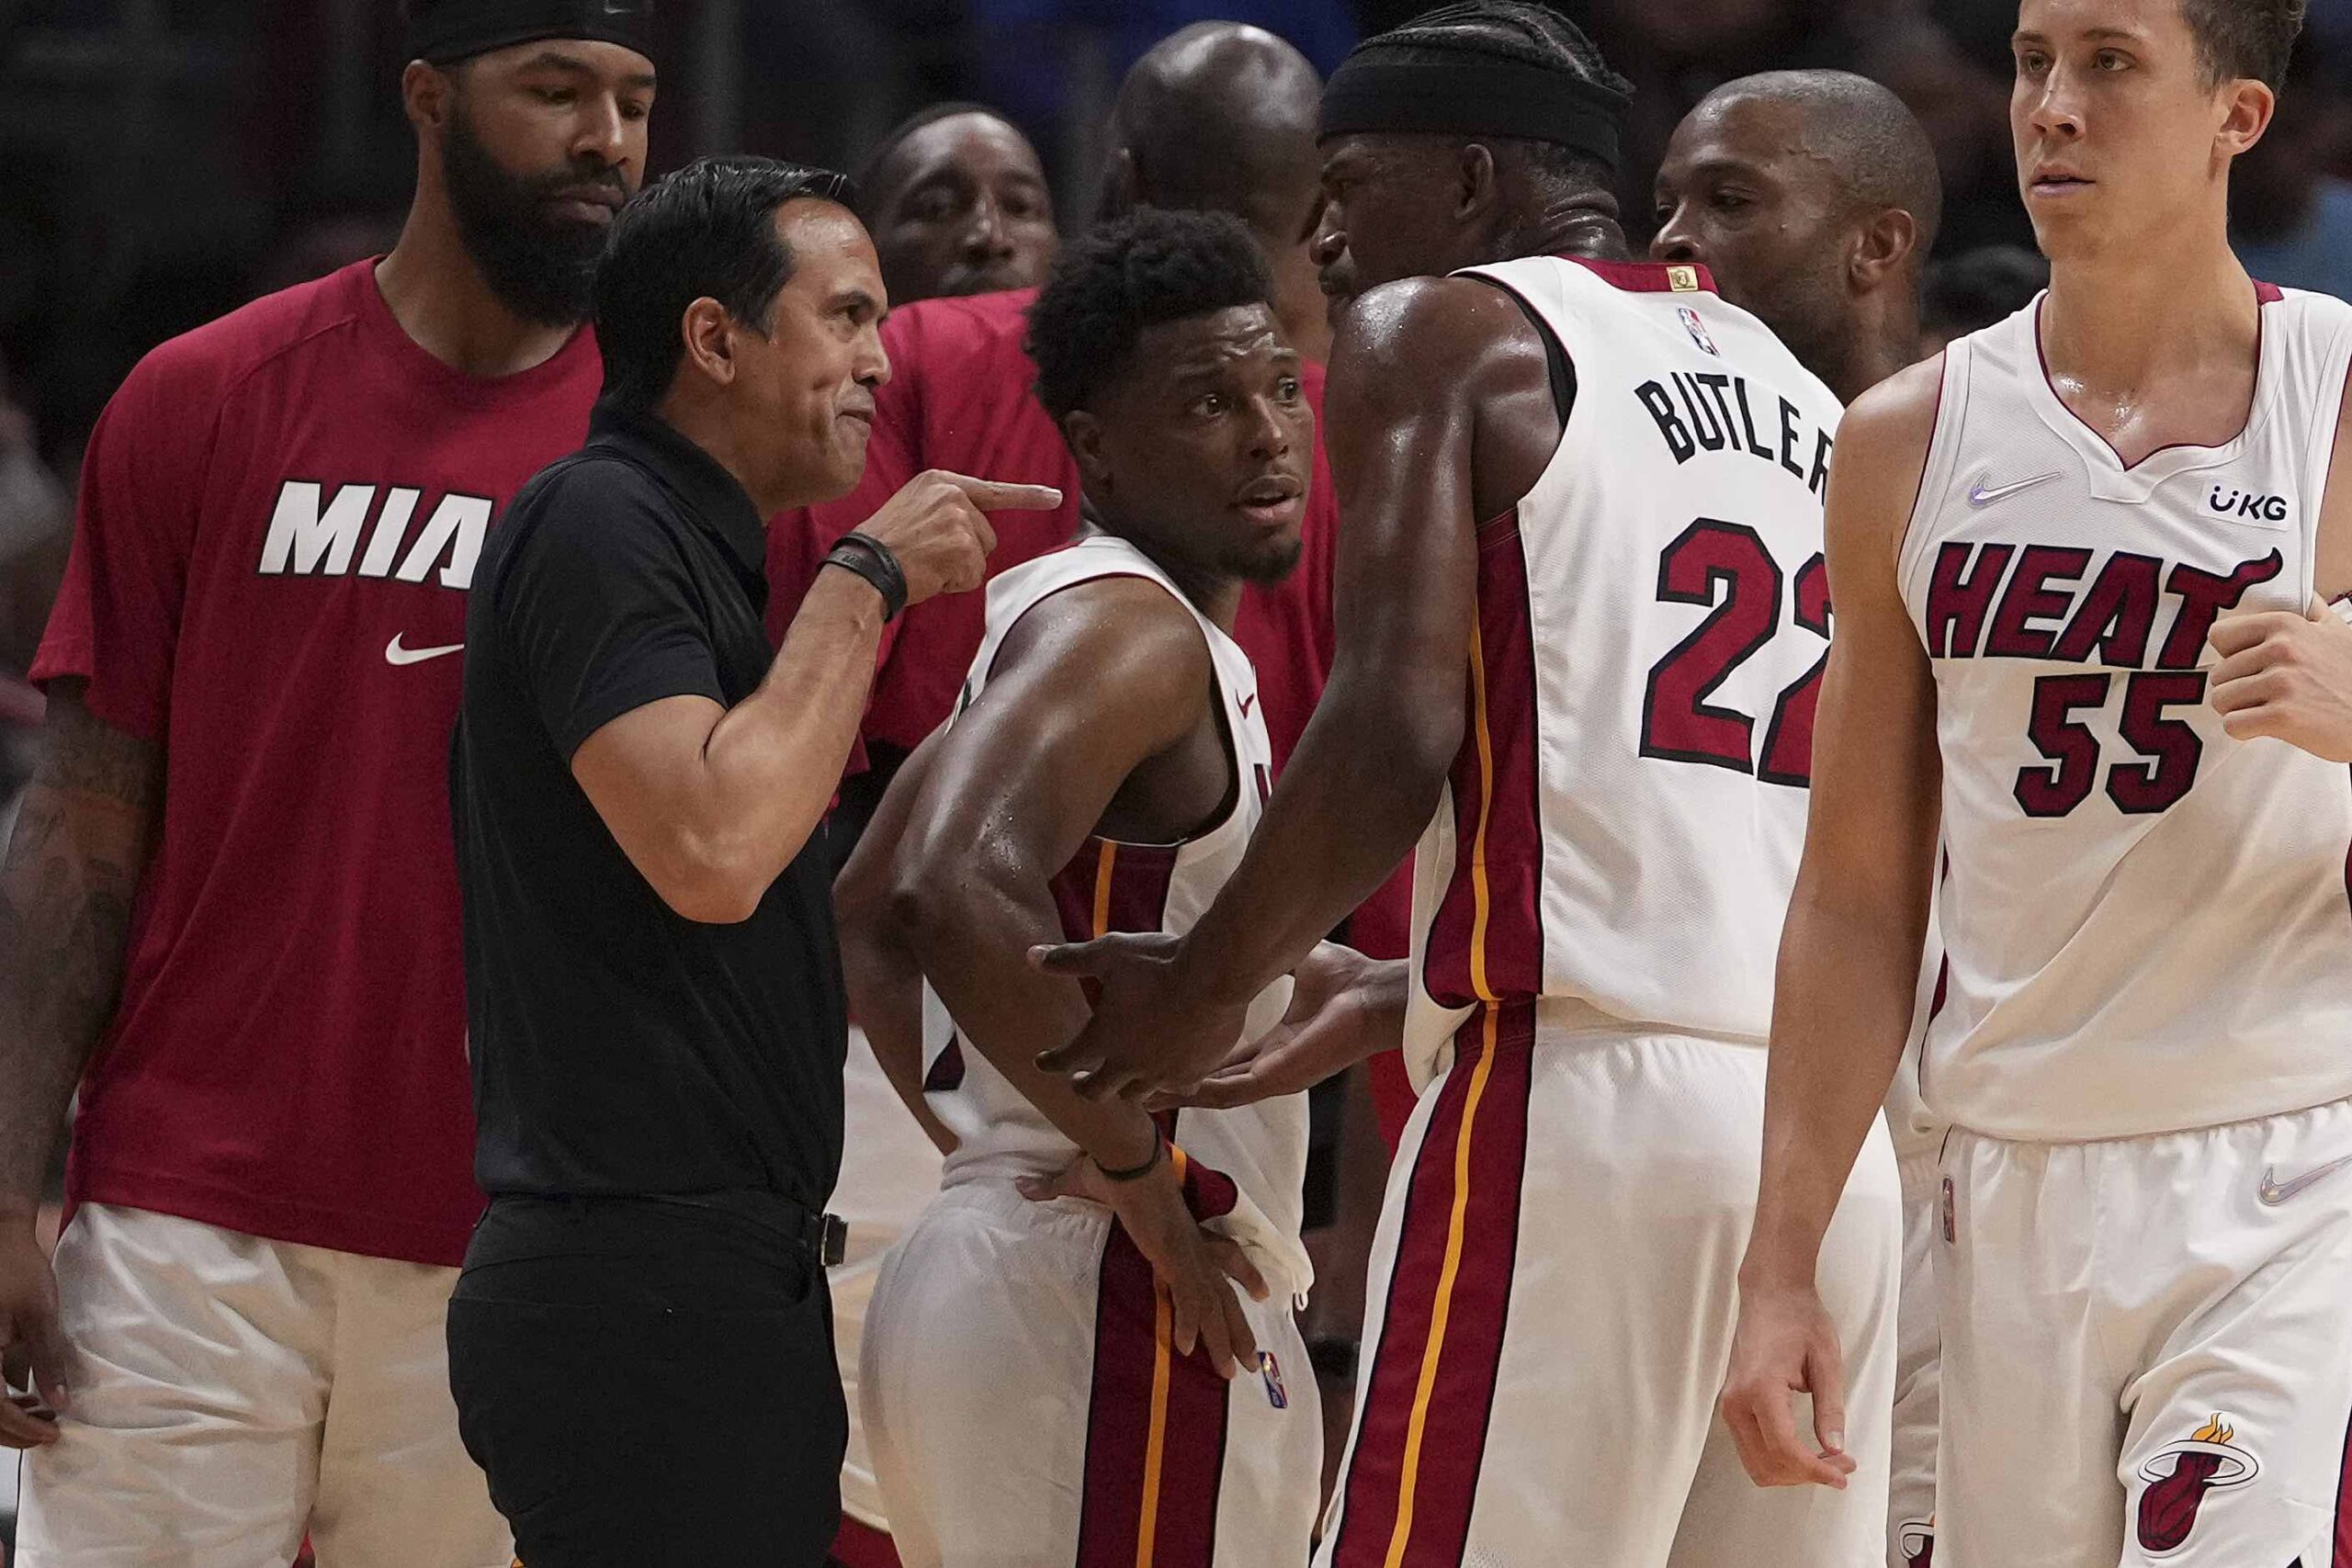 Miami Heat head coach Erik Spoelstra in an argument with star player Jimmy Butler